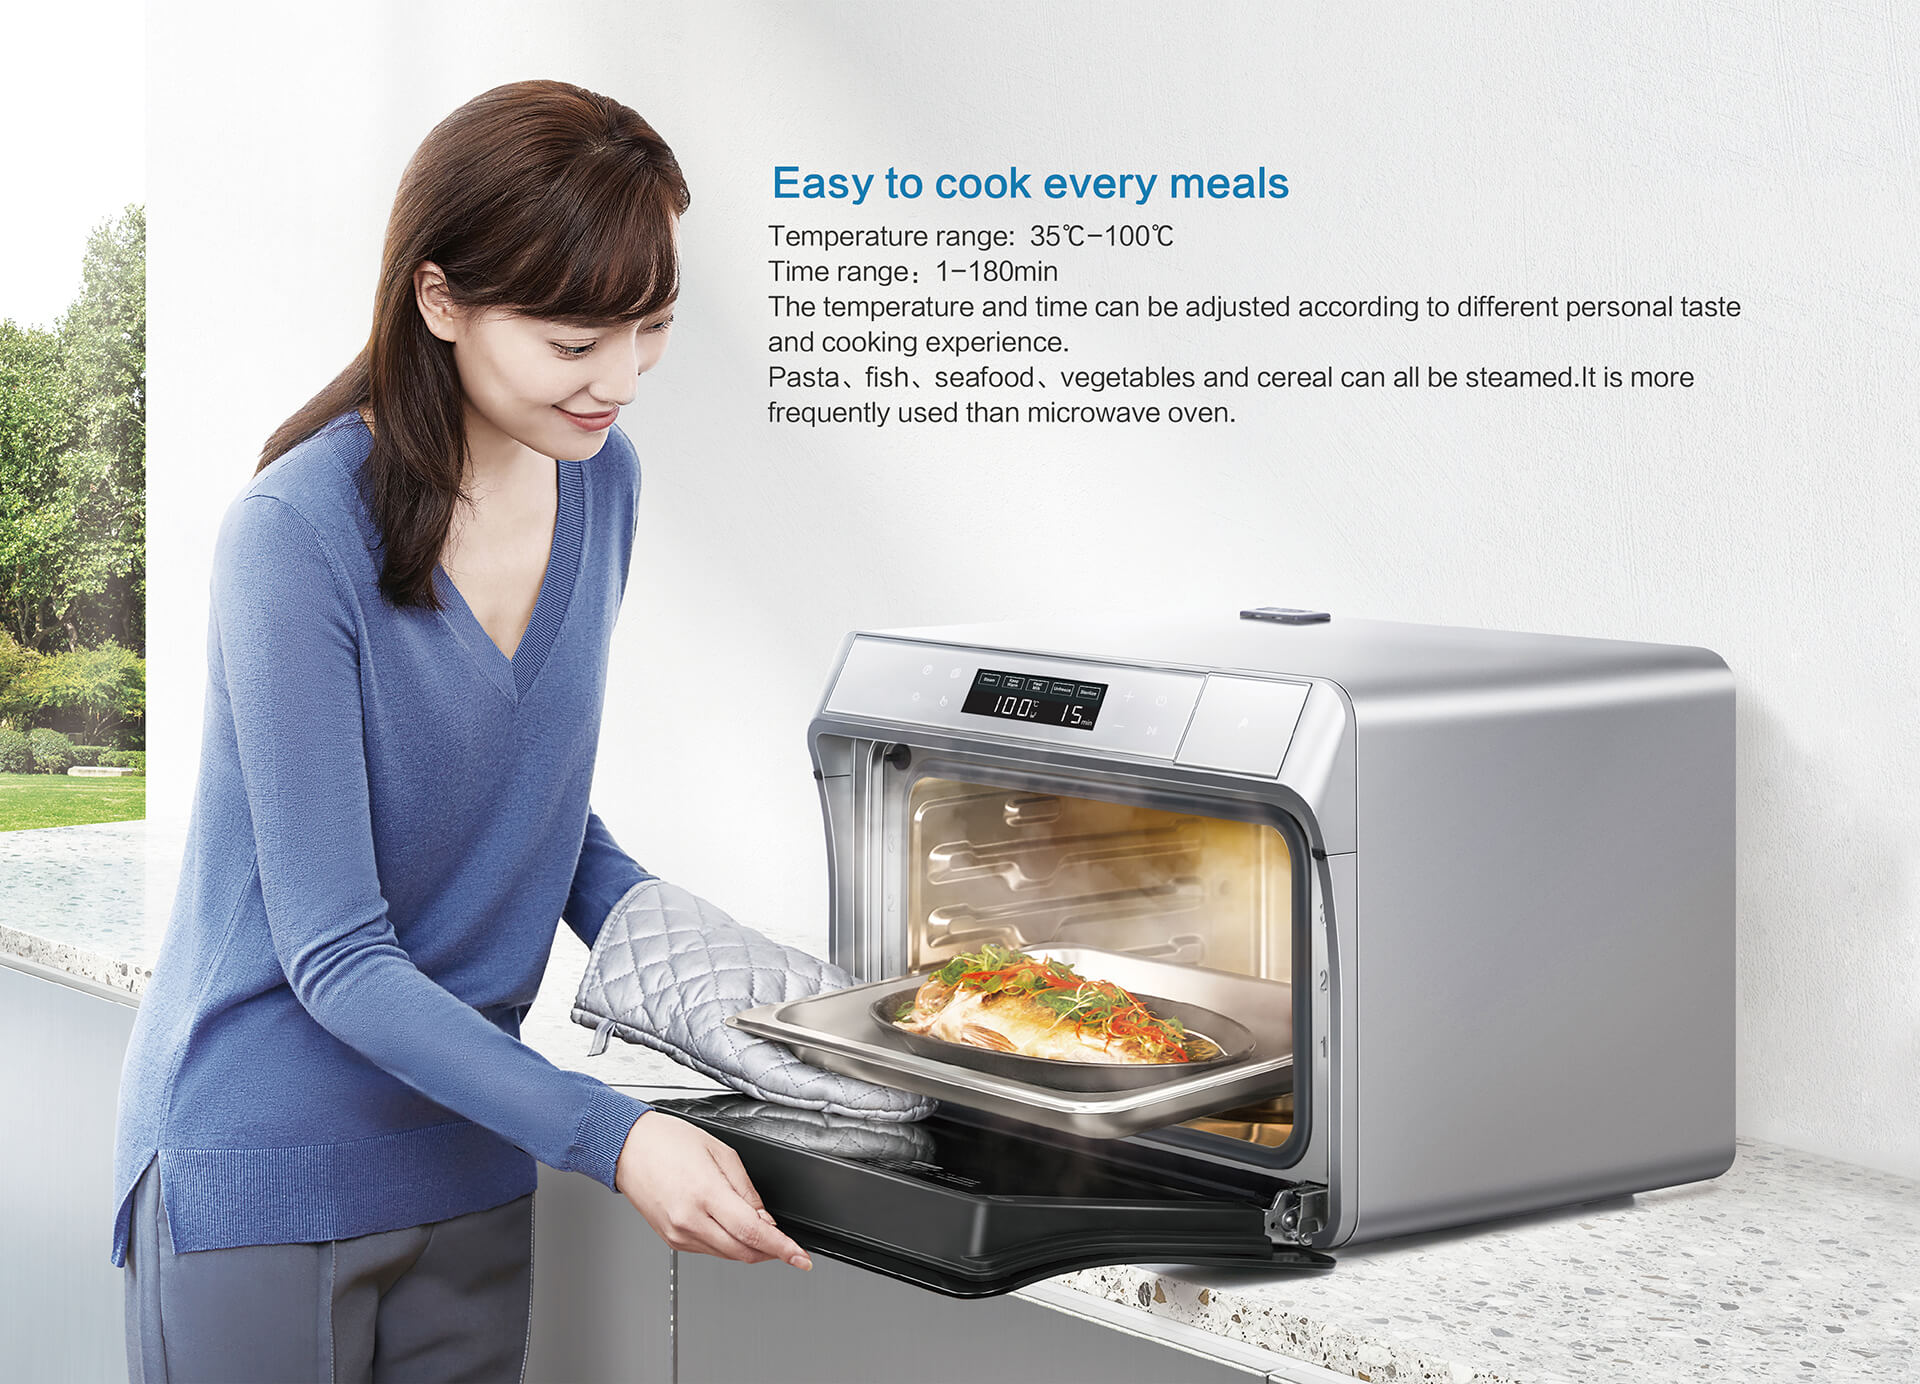 more complete functions: microwave ovens are basically used for hot food and hot vegetables, and other functions are difficult to achieve.